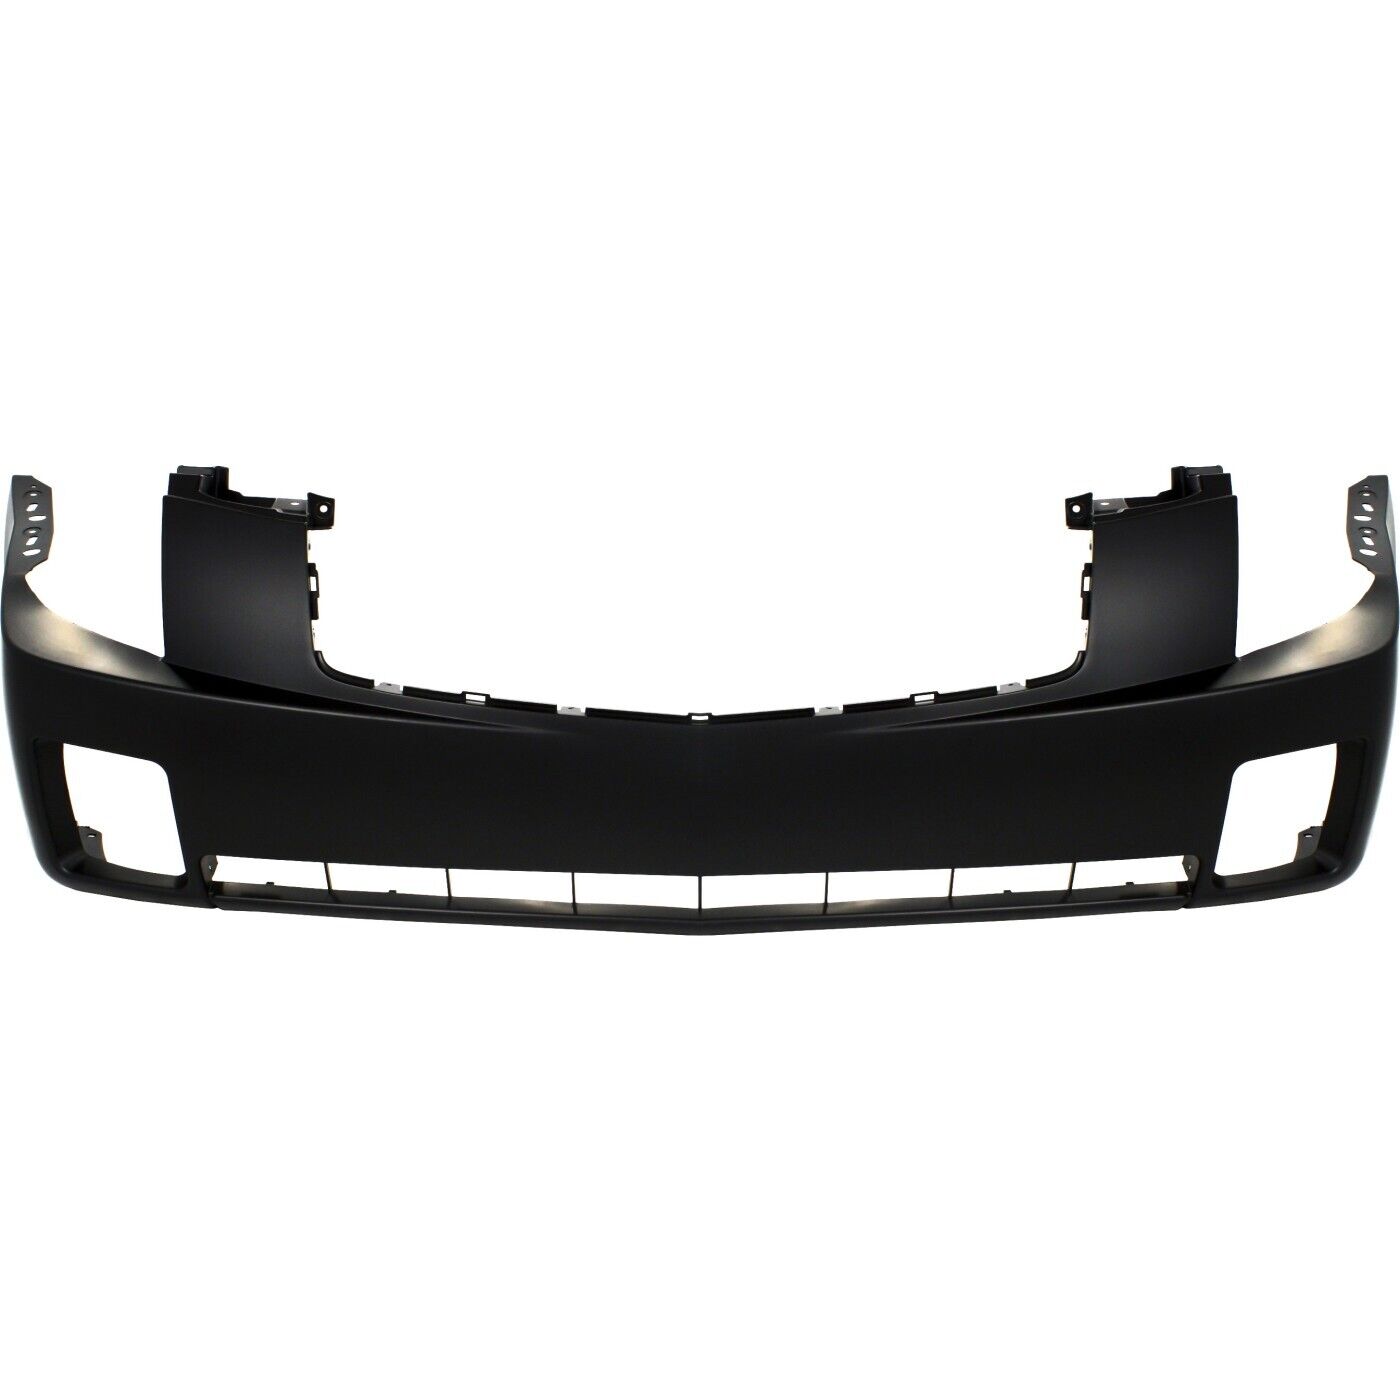 NEW Primed - Front Bumper Cover Fascia for 2003-2007 Cadillac CTS Sedan 03-07